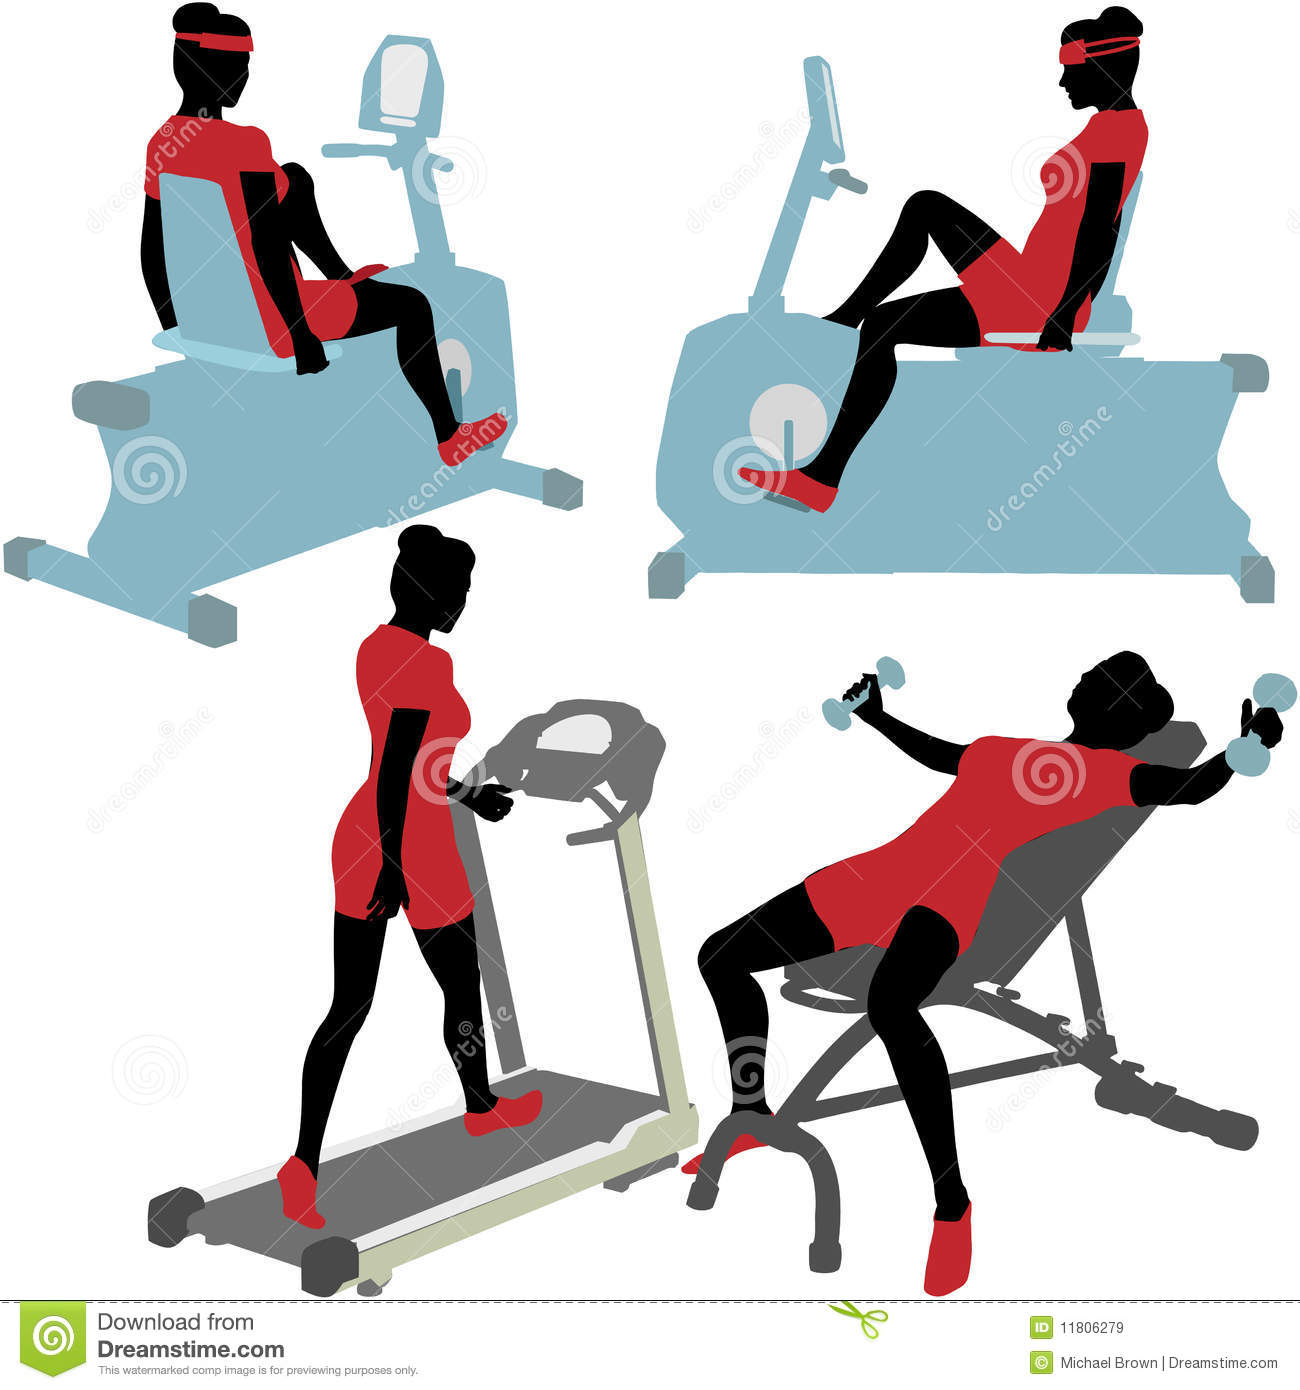 Women On Gym Fitness Exercise Machines Royalty Free Stock Images